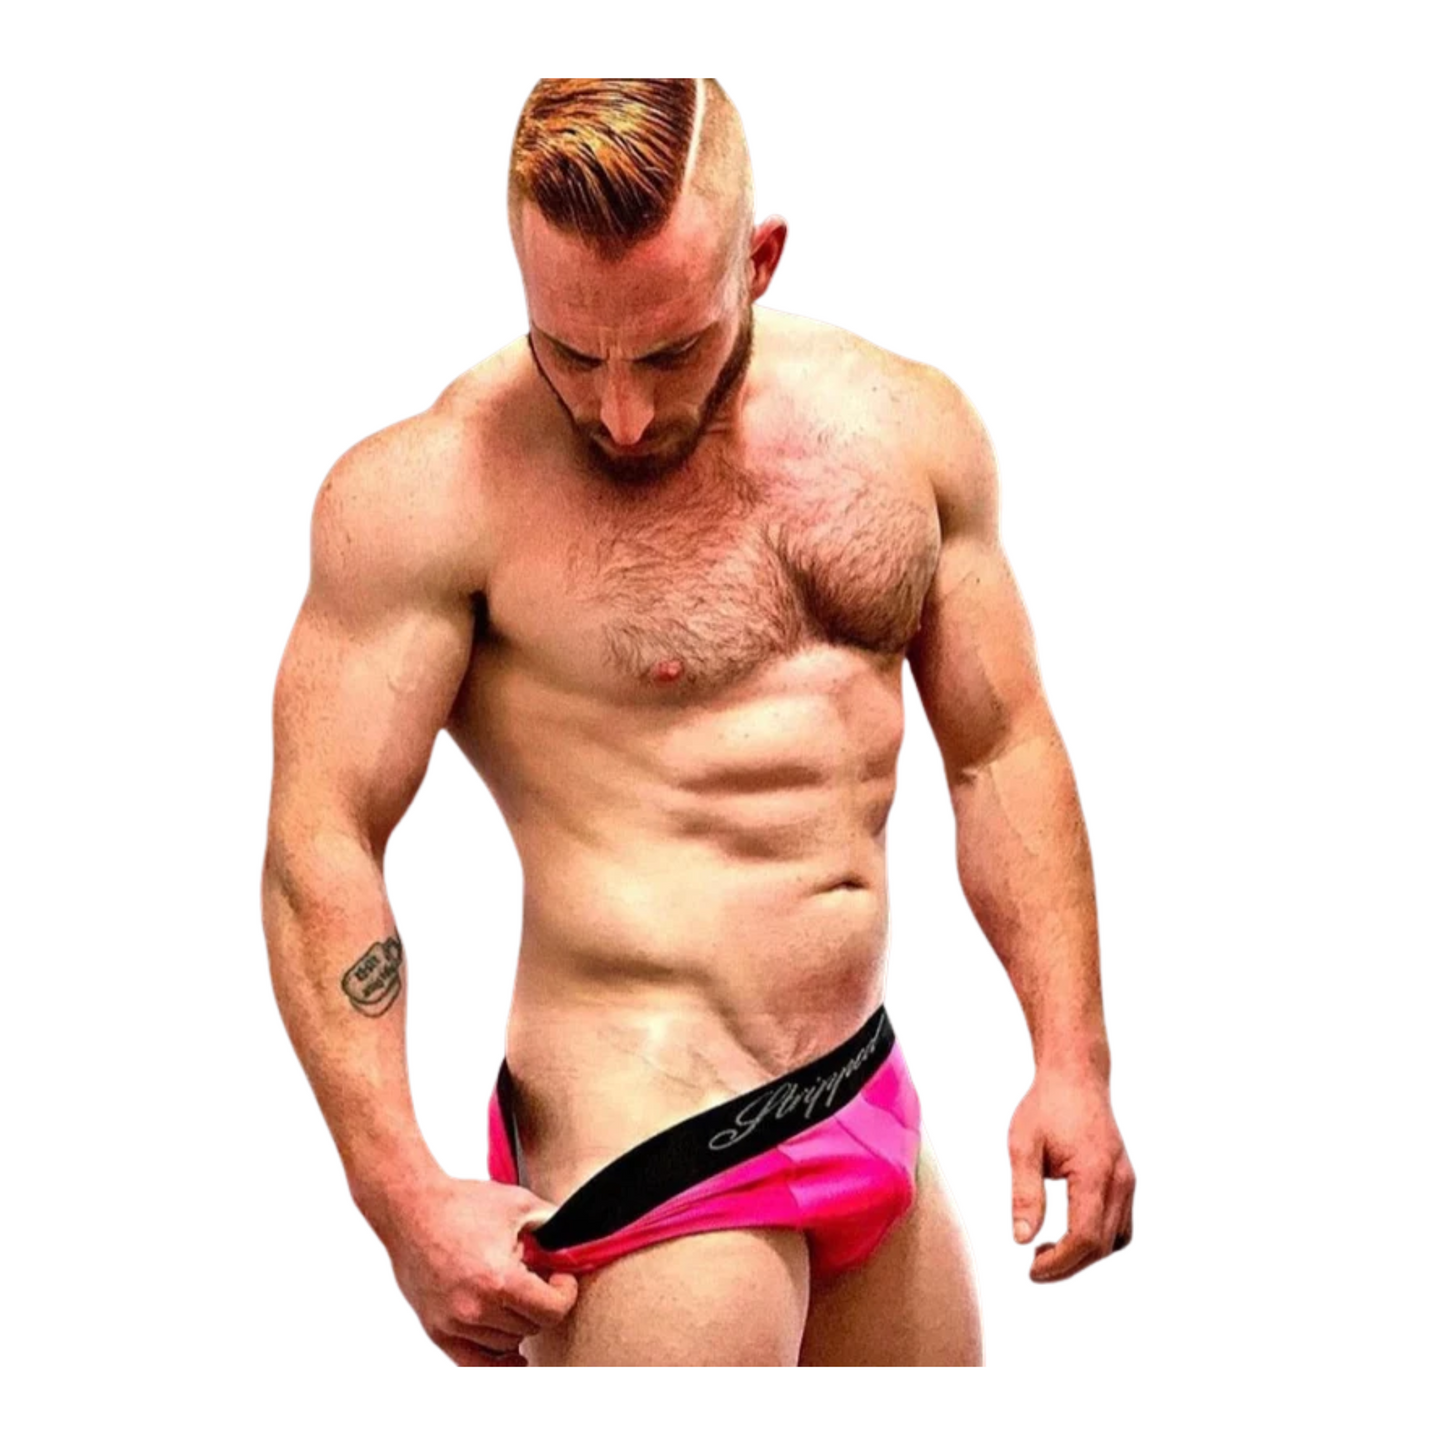 Pink Brief - Body: By Stripped